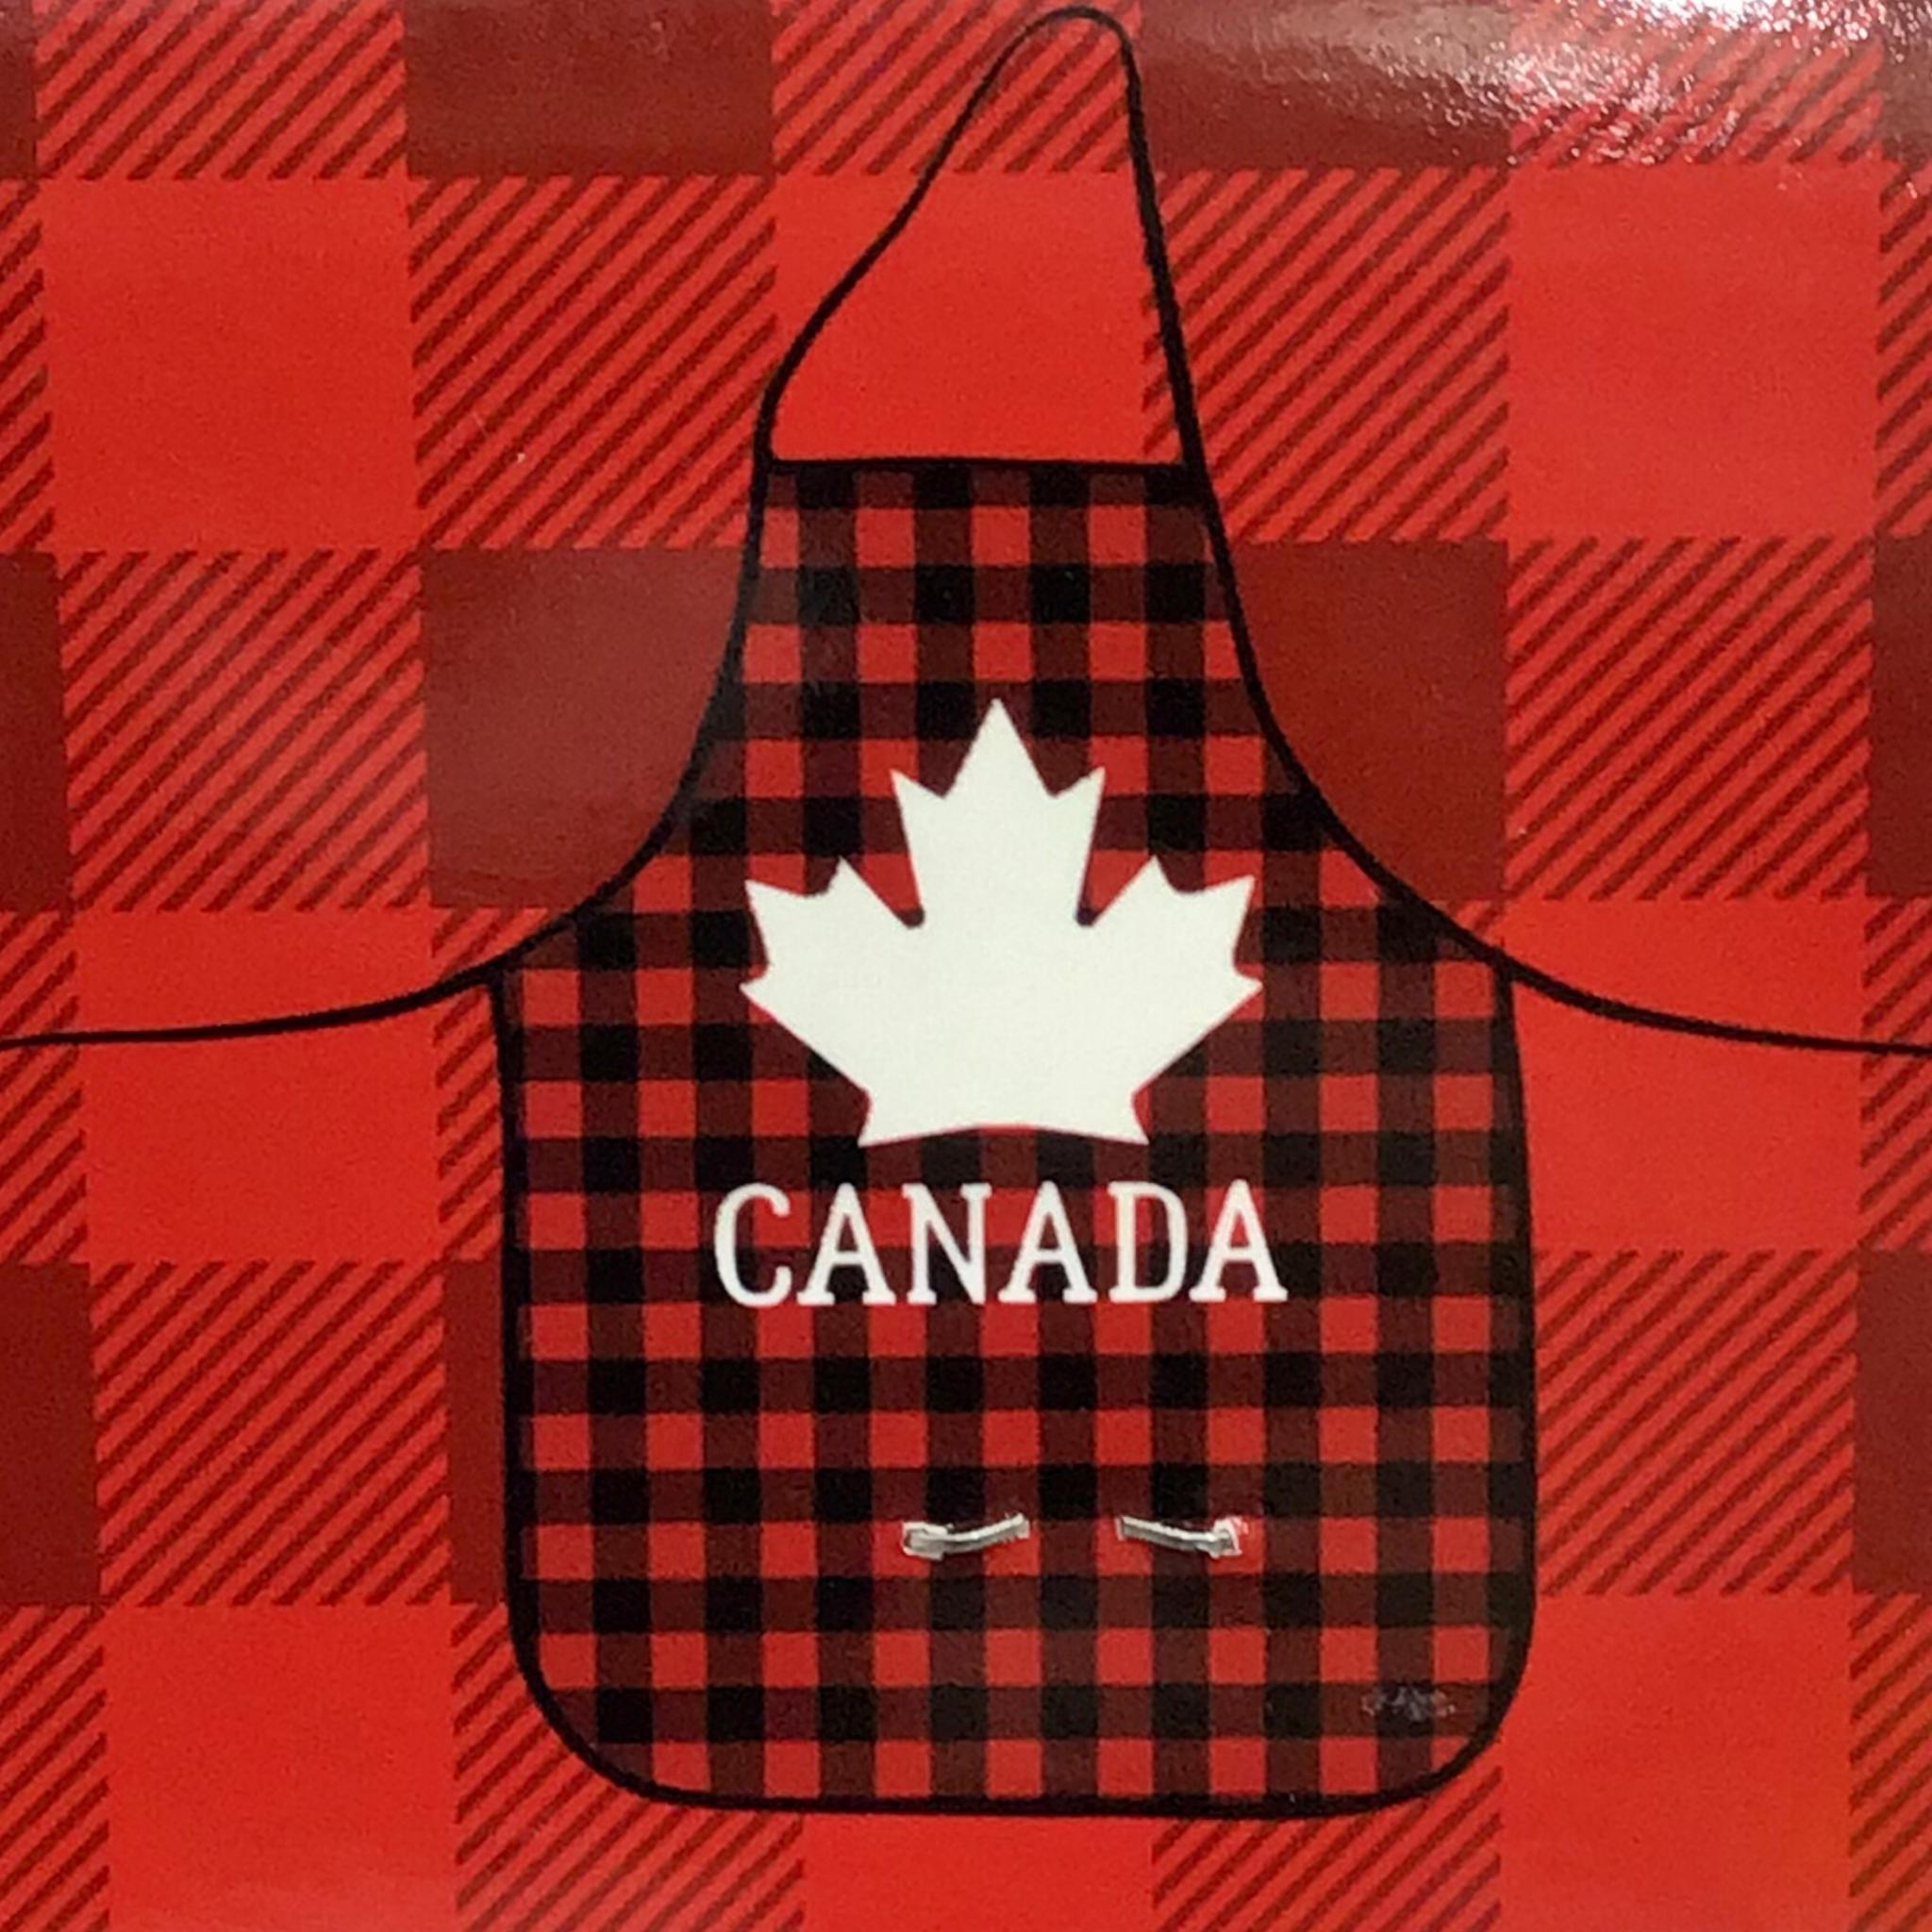 Red and Black Plaid Canada Apron with Maple Leaf Tablier